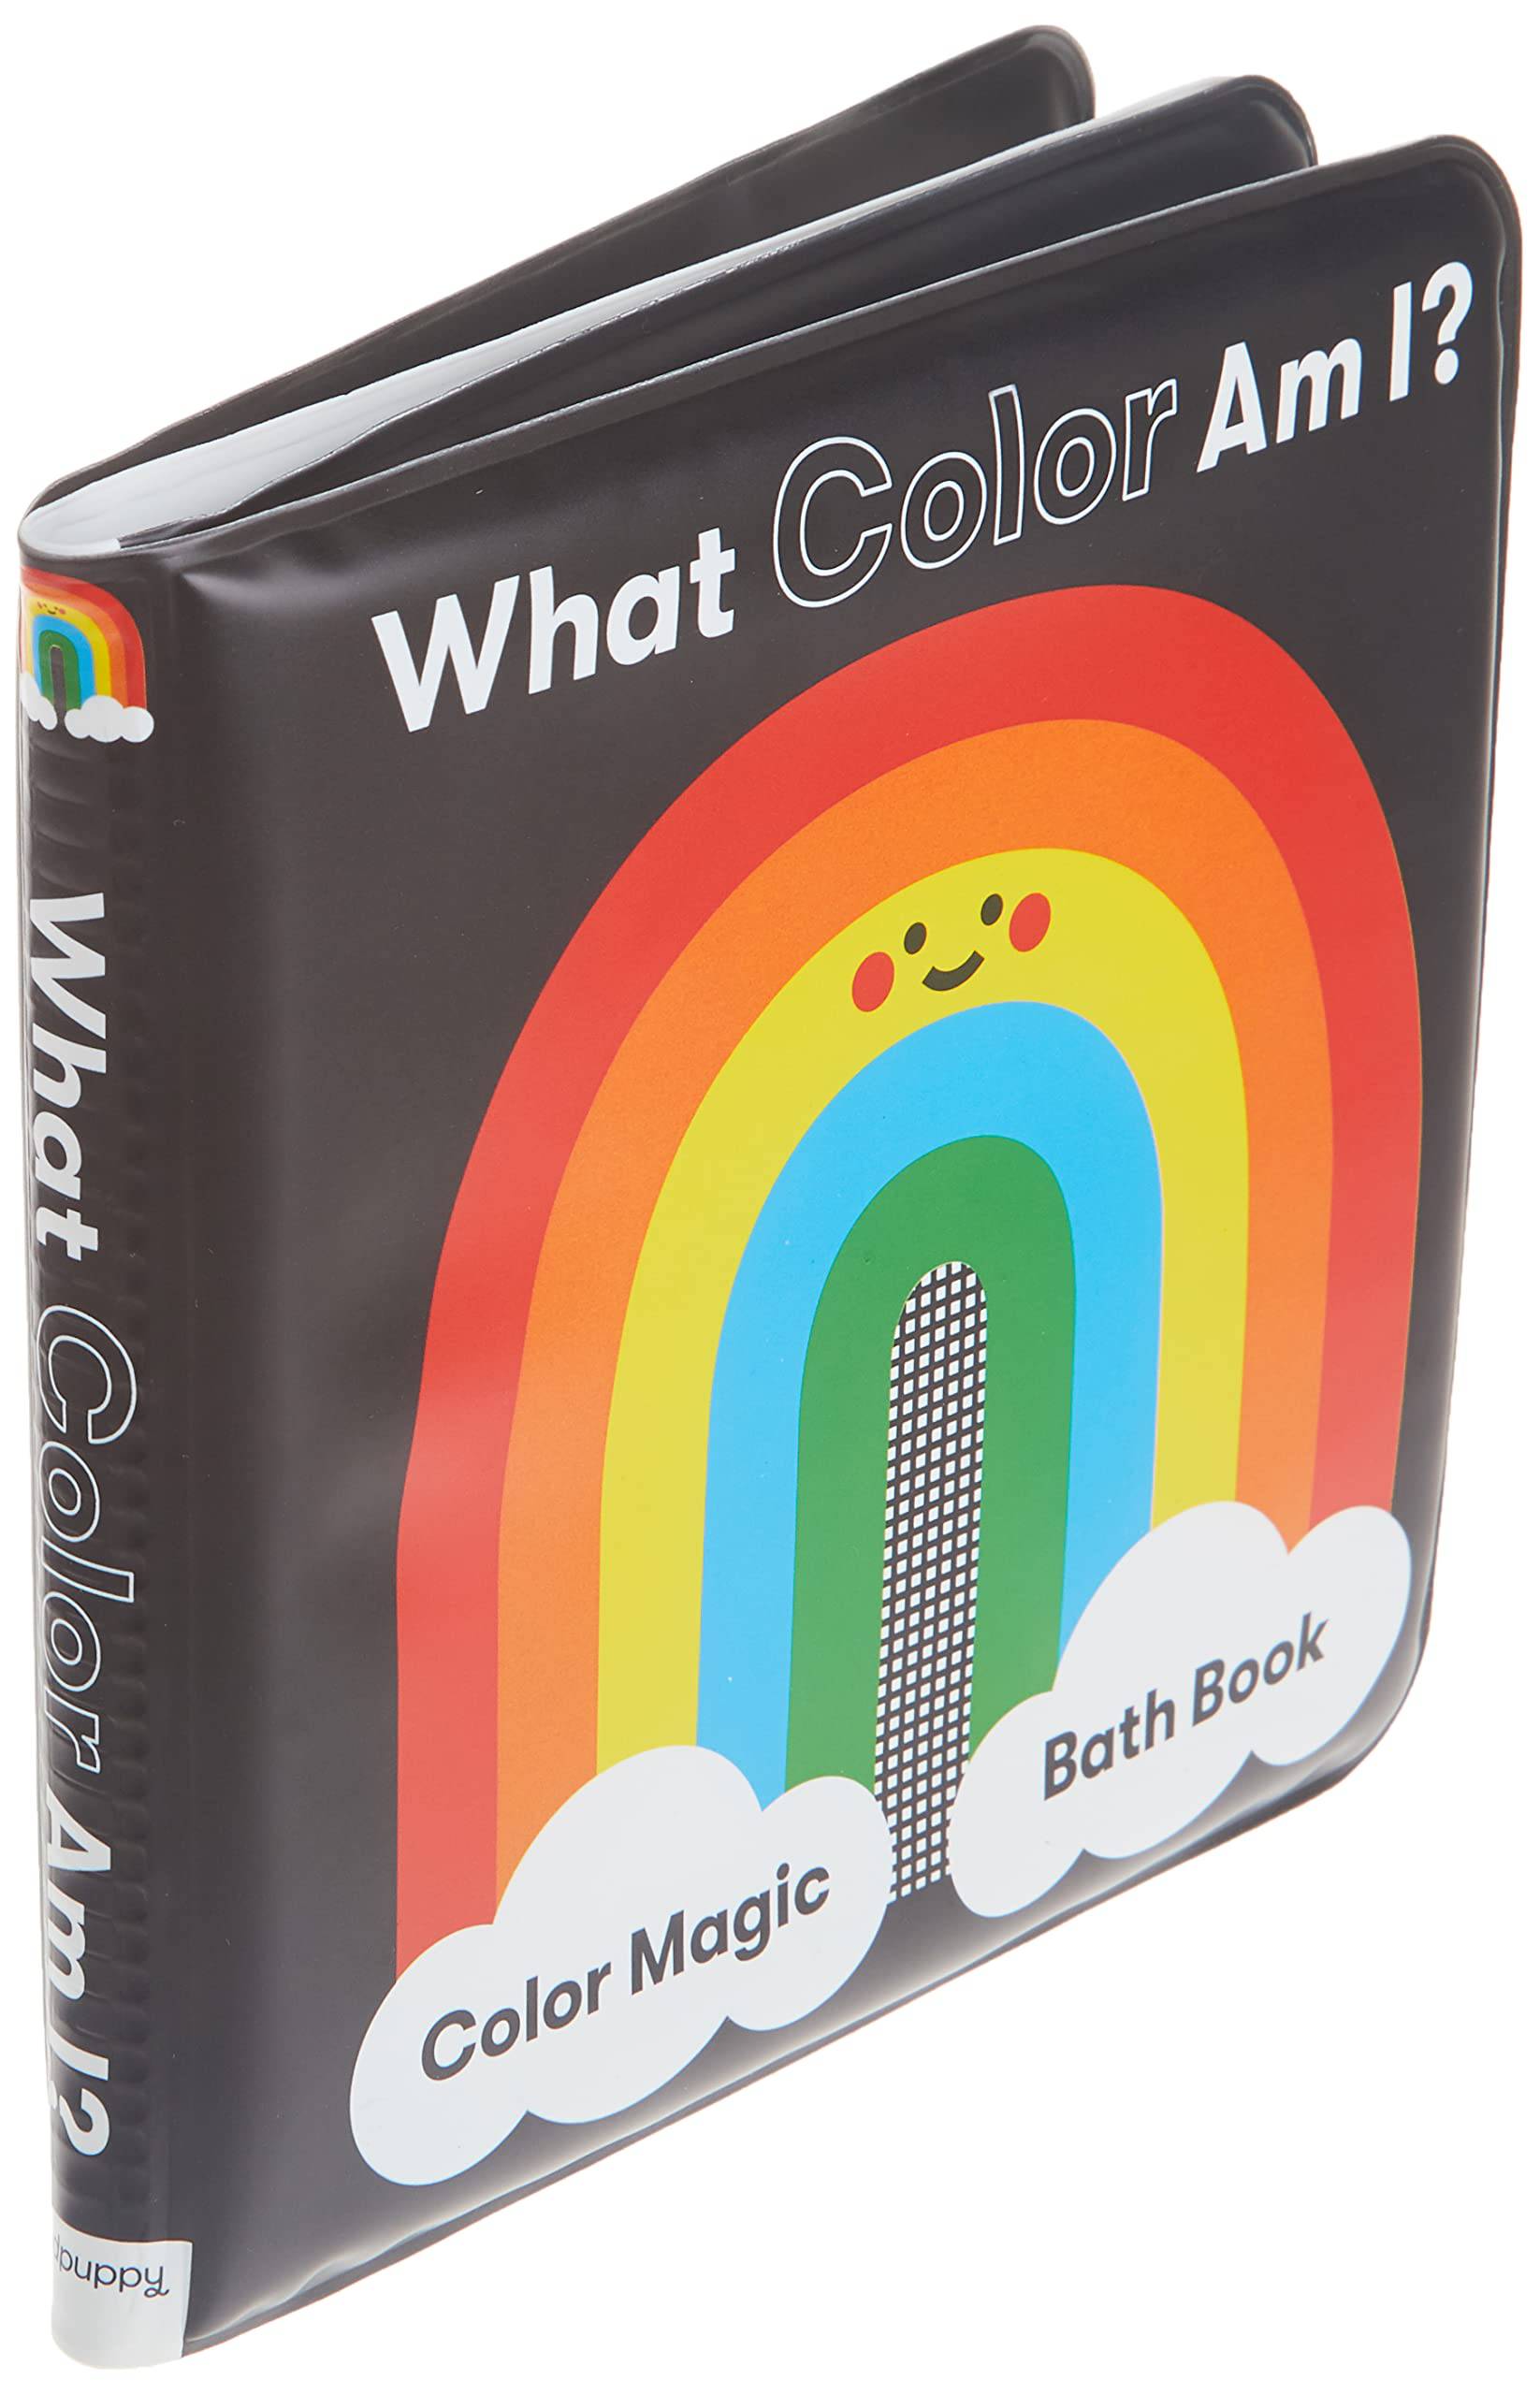 What Color Am I? Magic Bath Book - Twinkle Twinkle Little One